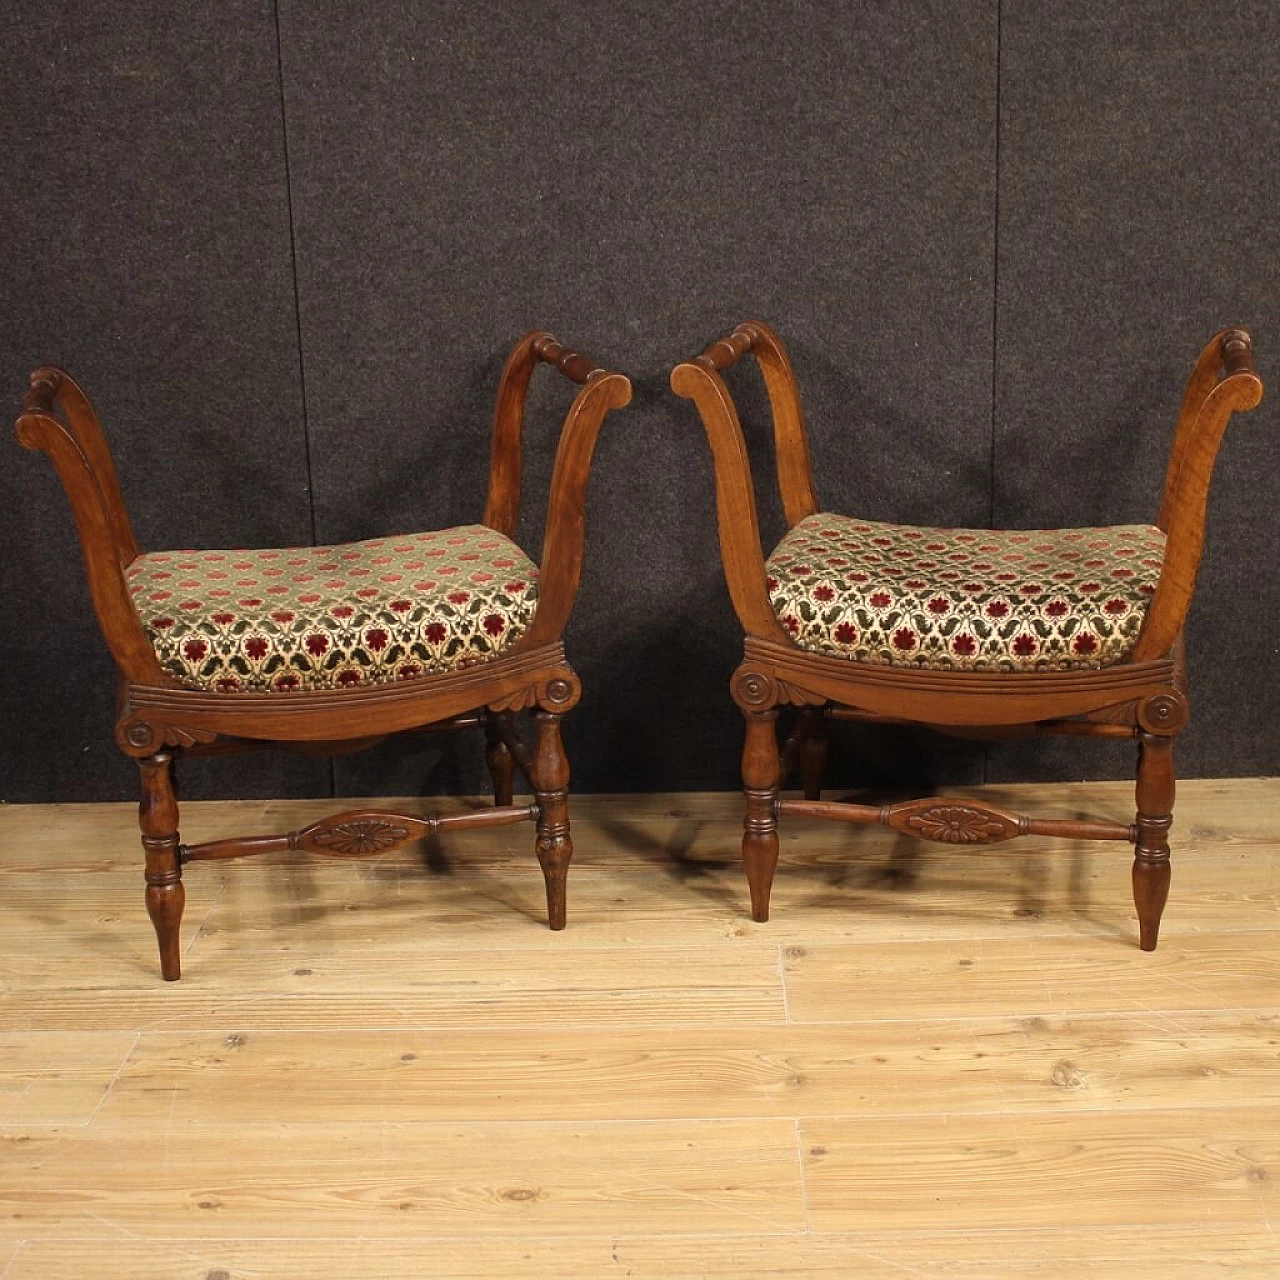 Pair of Charles X benches in carved walnut and floral fabric, 19th century 1116097